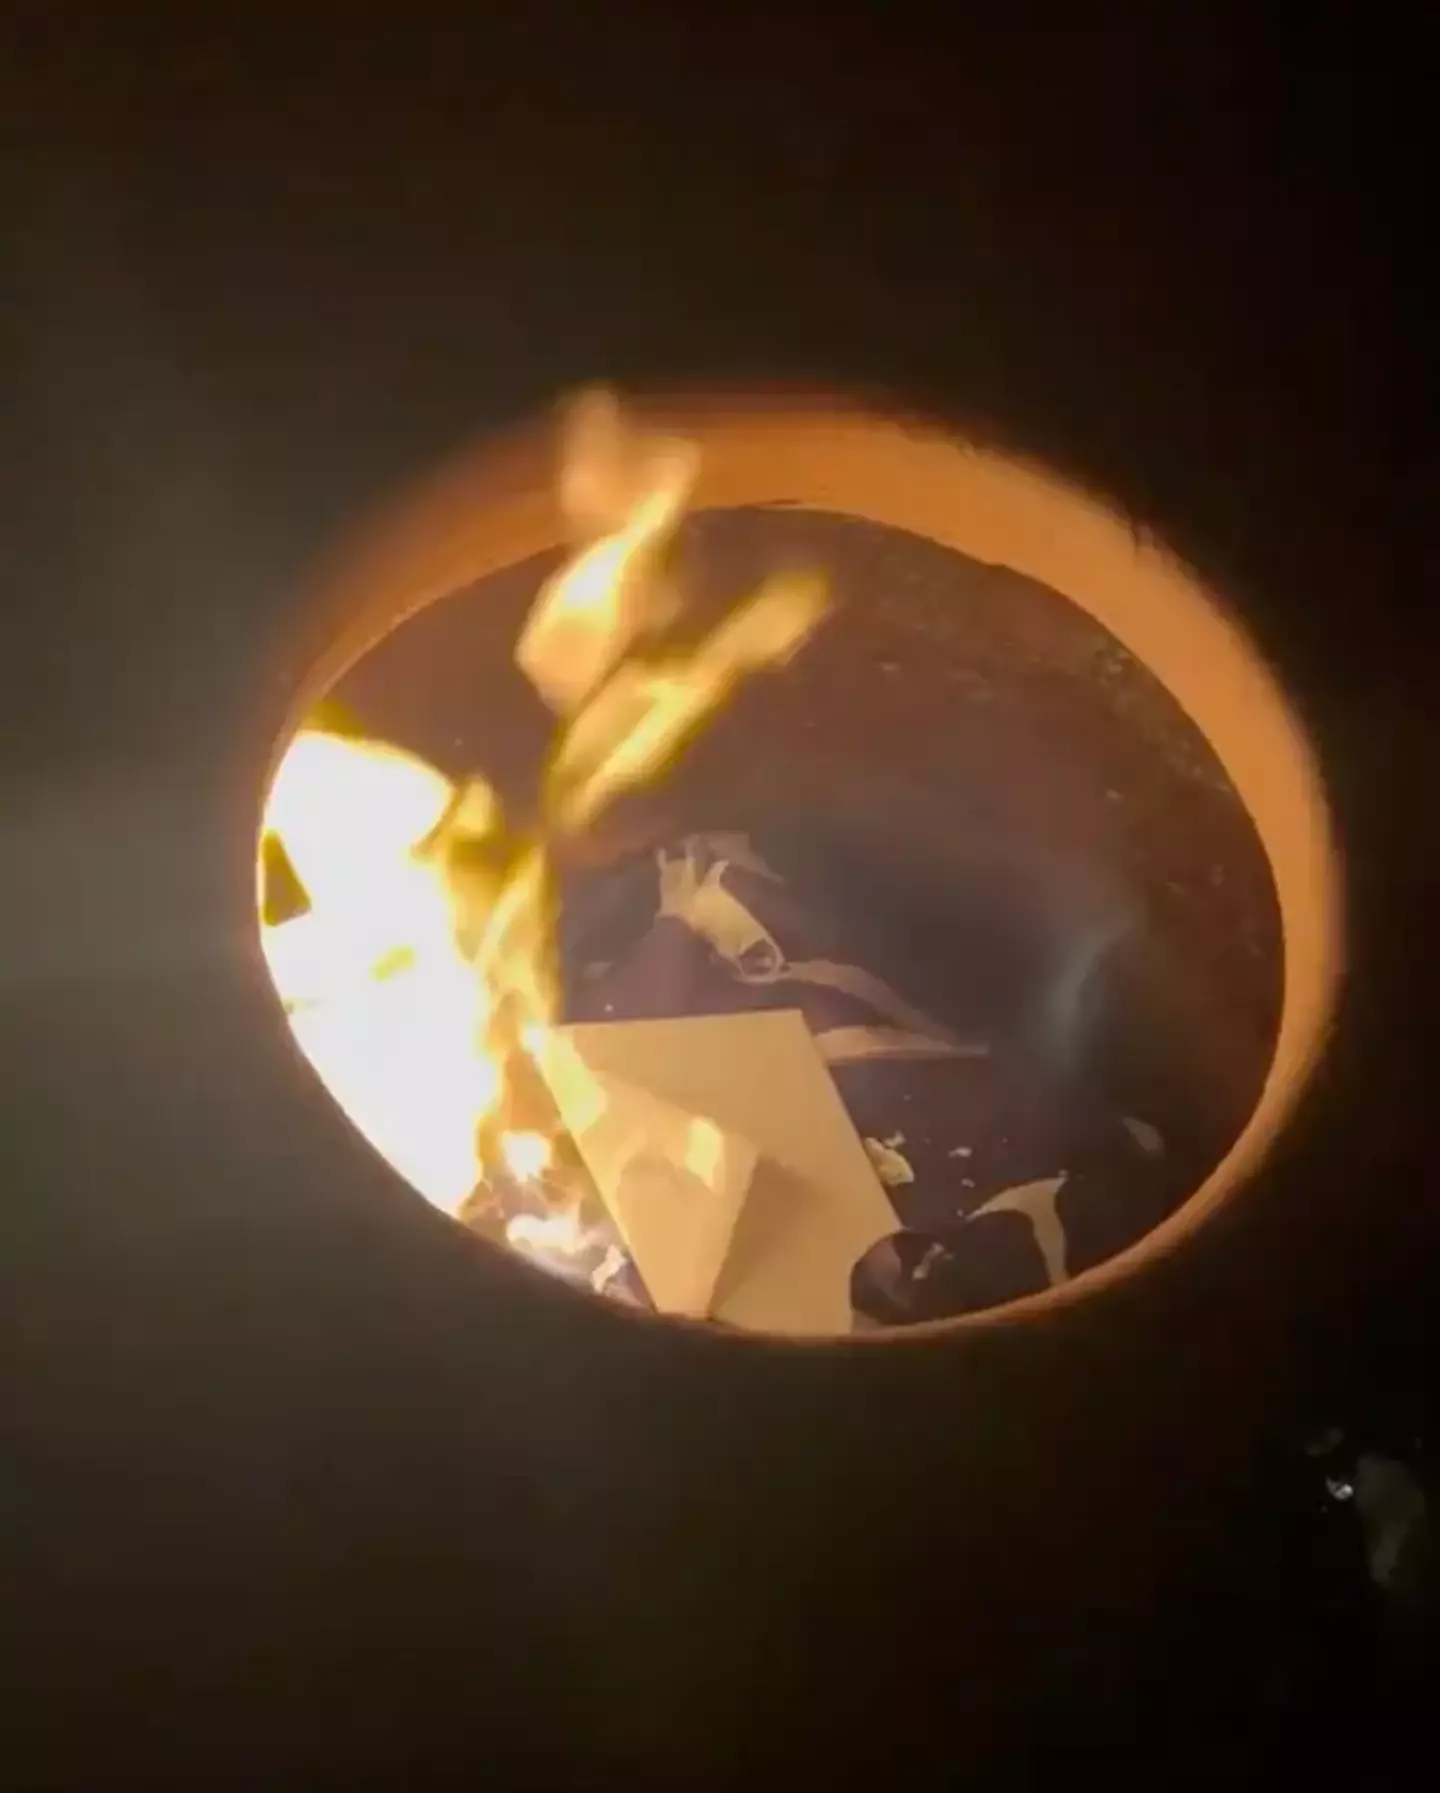 The post includes a clip of a letter burning in a firepit.